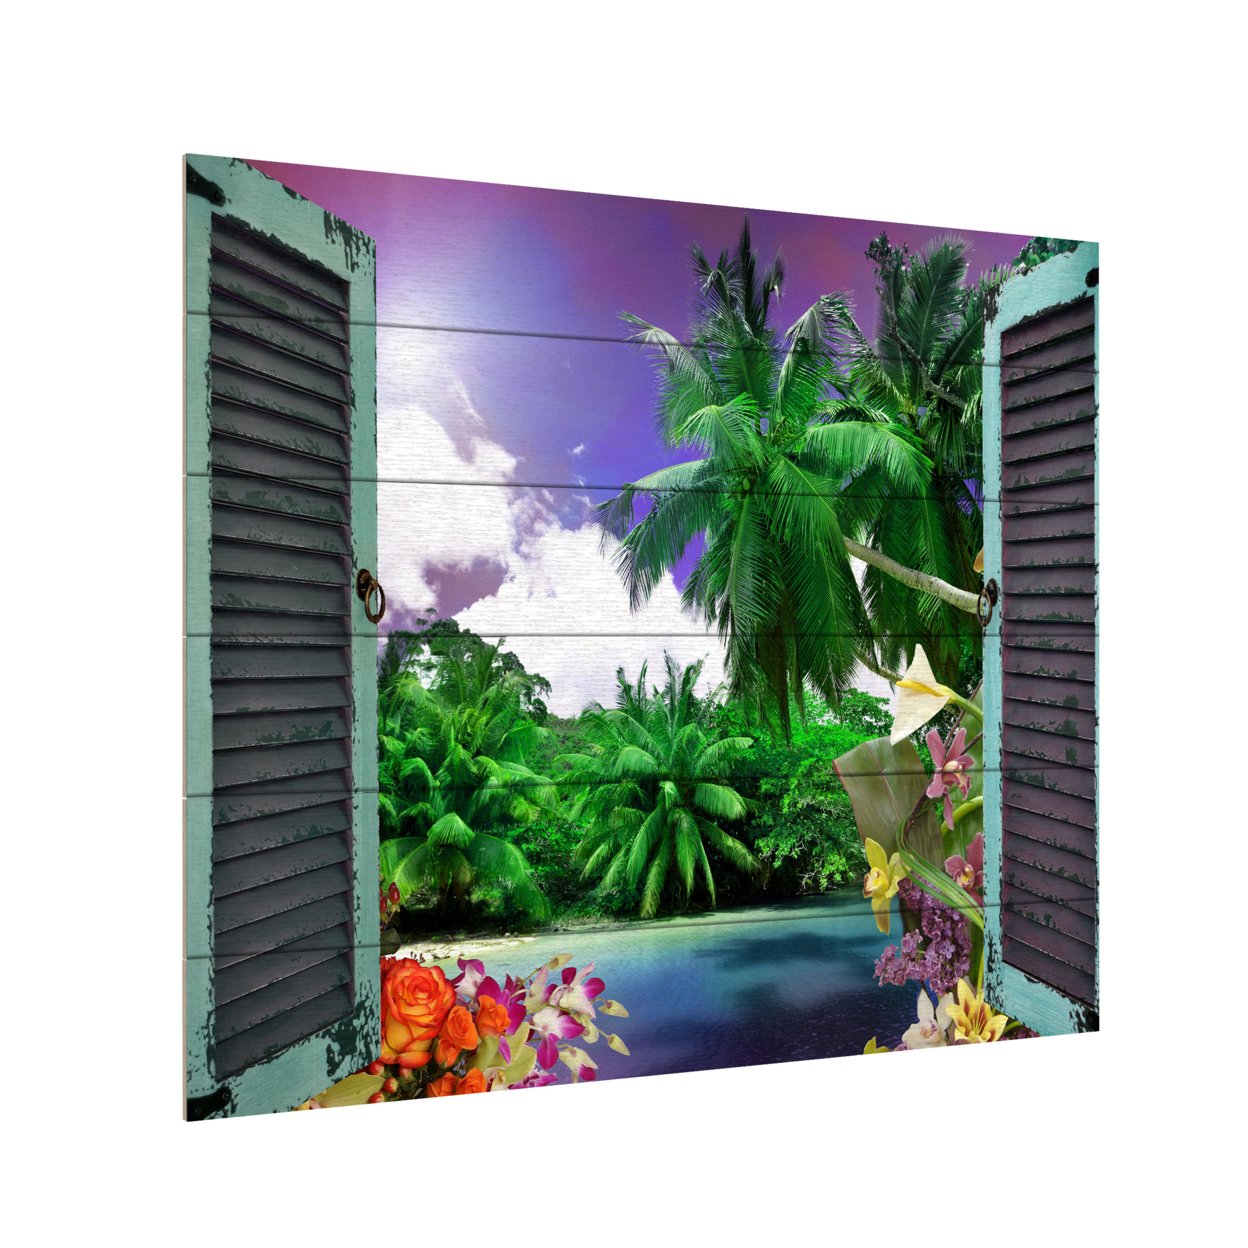 Wooden Slat Art 18 X 22 Inches Titled Window To Paradise I Ready To Hang Home Decor Picture